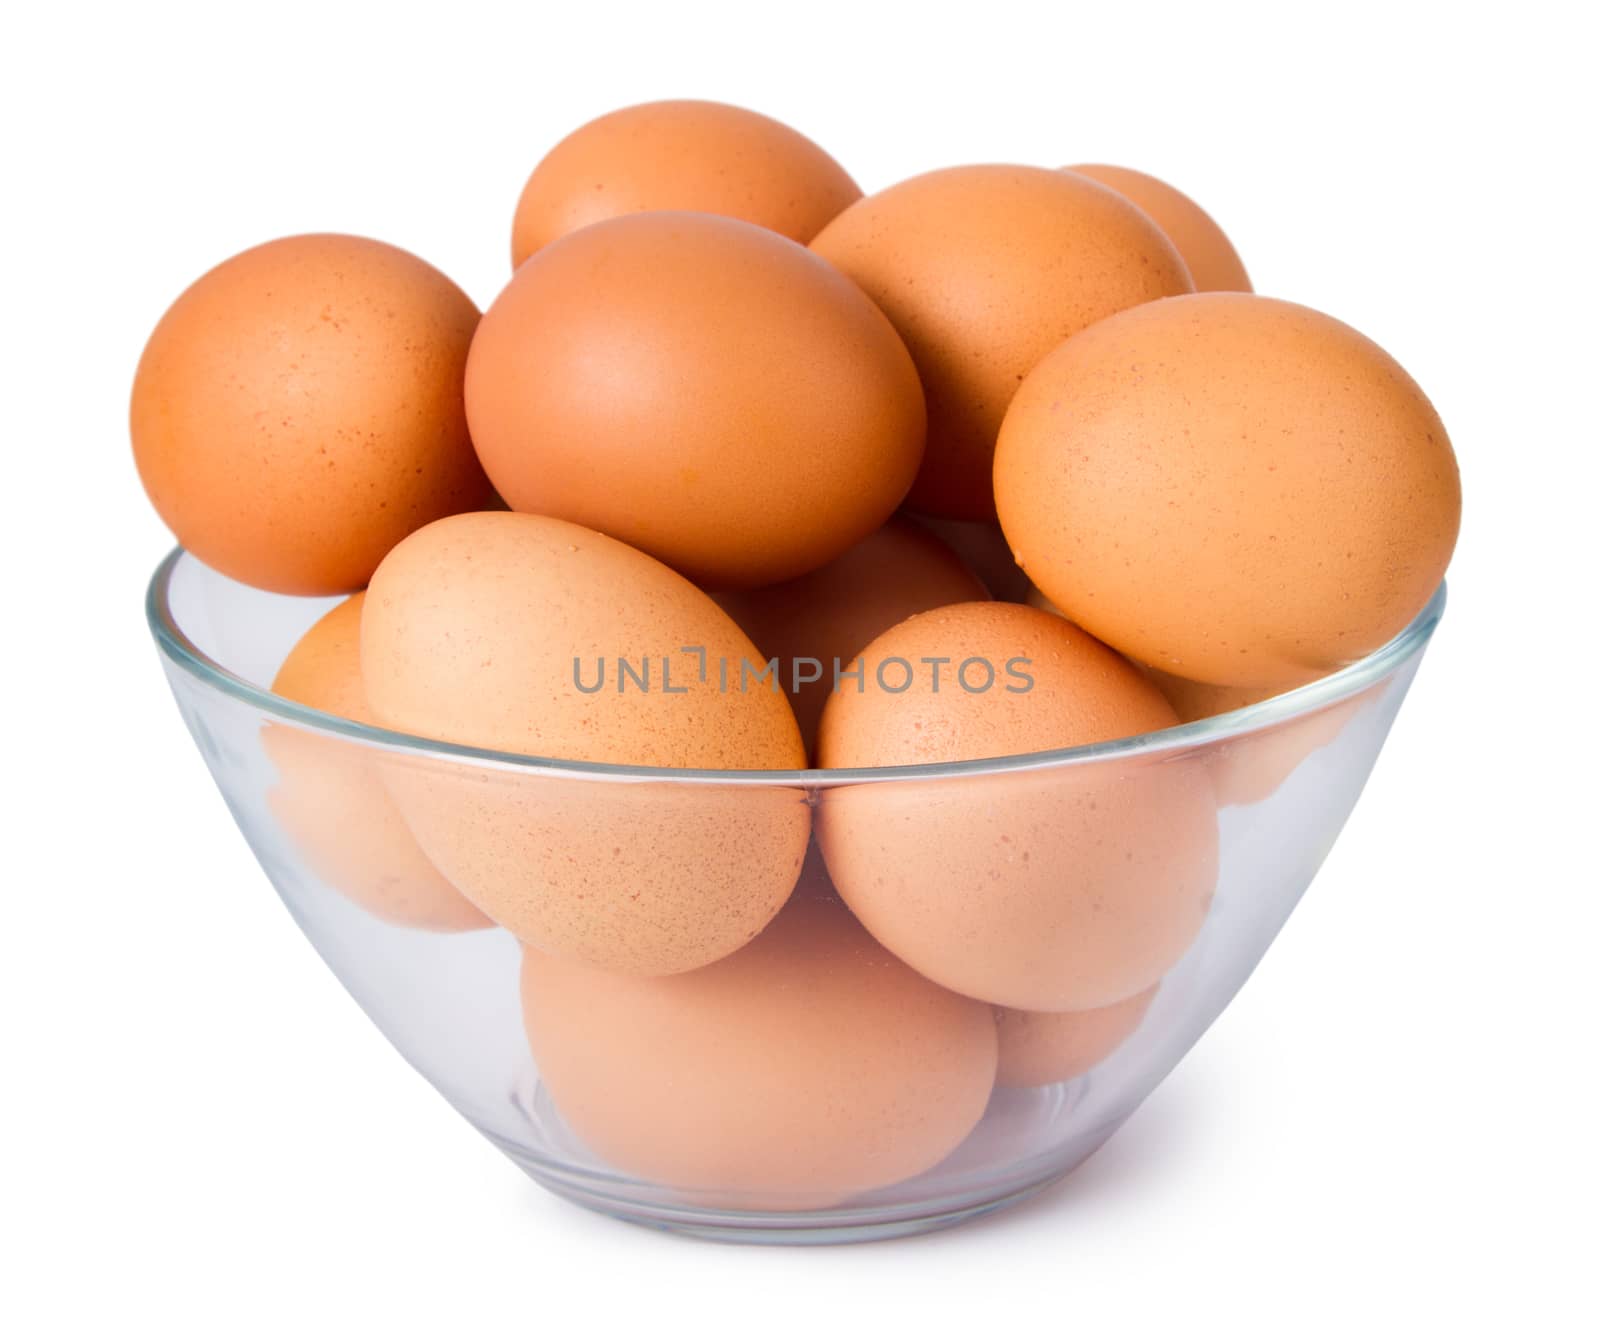 Brown eggs isolated on a white background